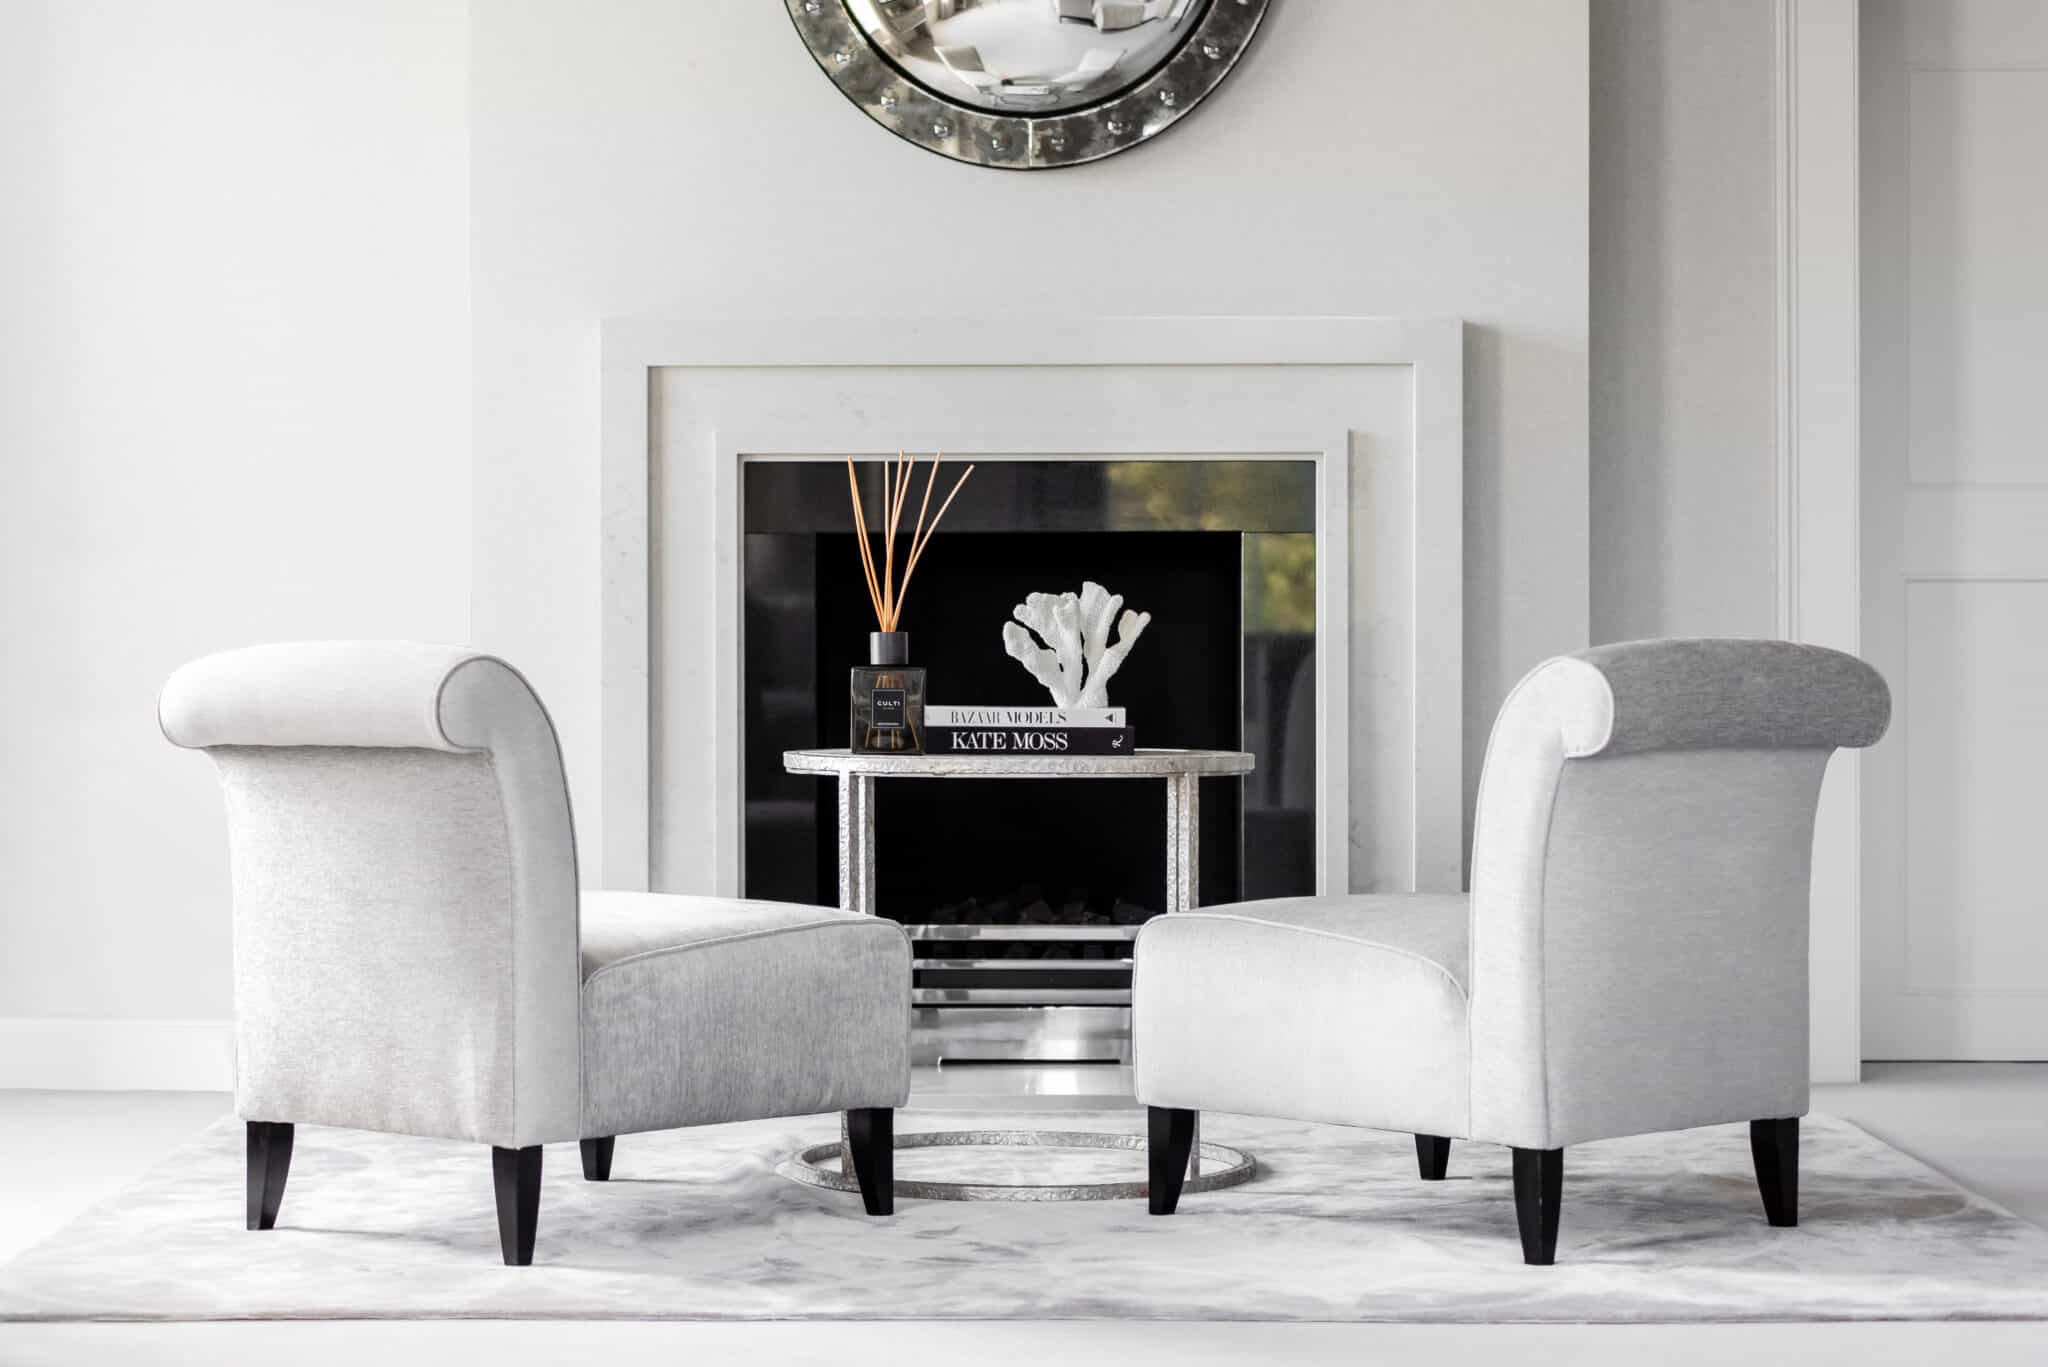 A pair of grey velvet chairs in front of a fireplace.